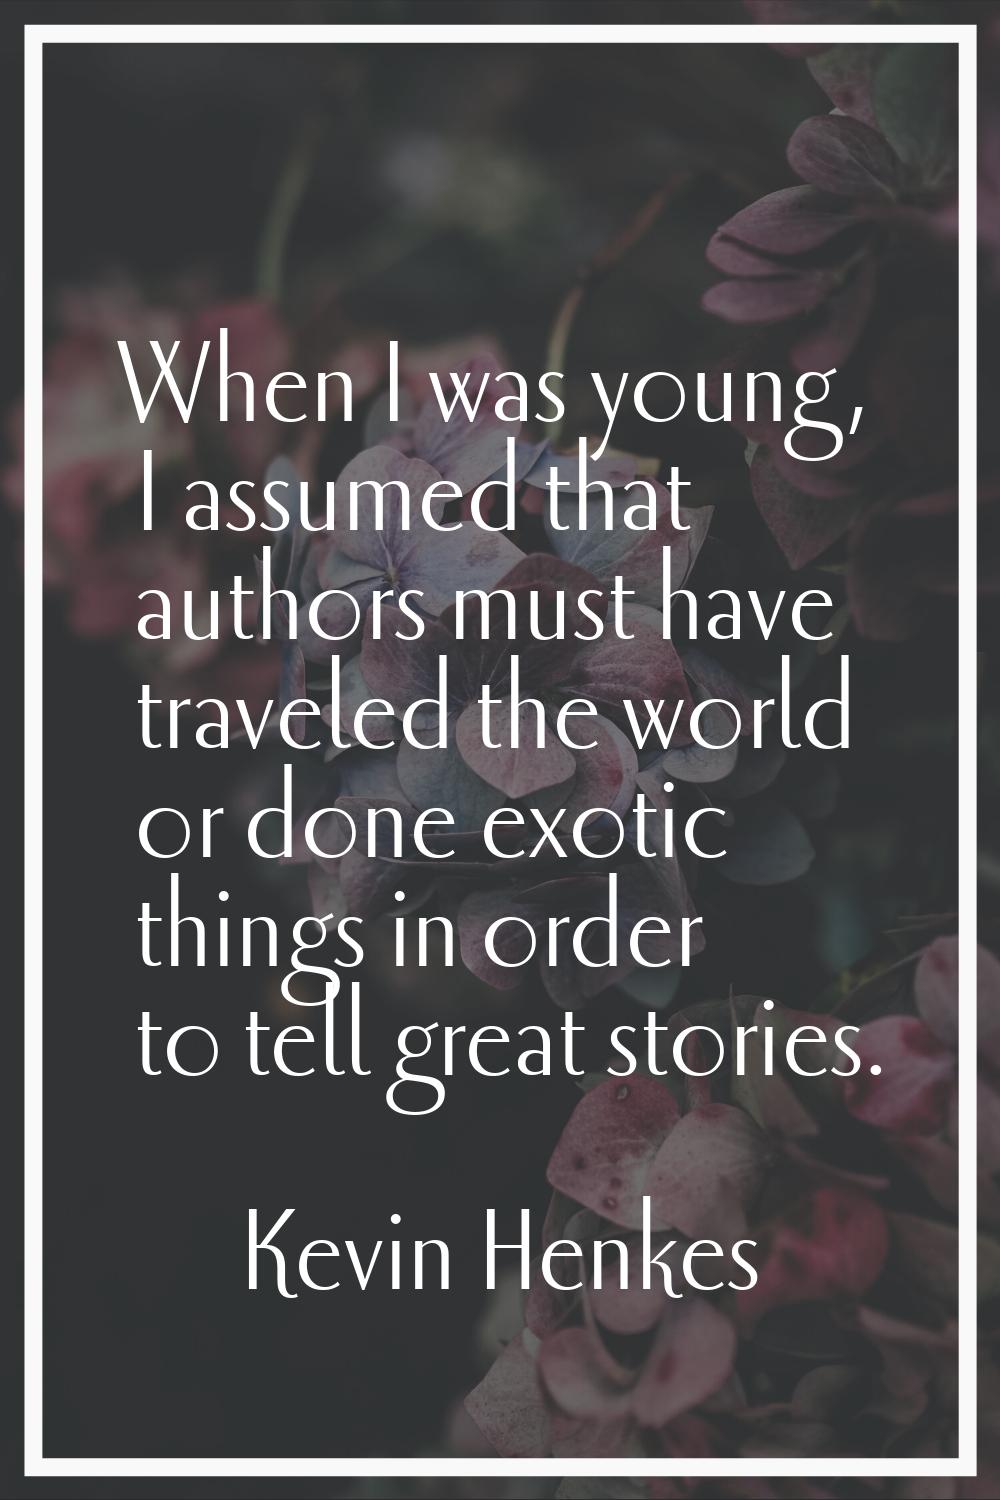 When I was young, I assumed that authors must have traveled the world or done exotic things in orde